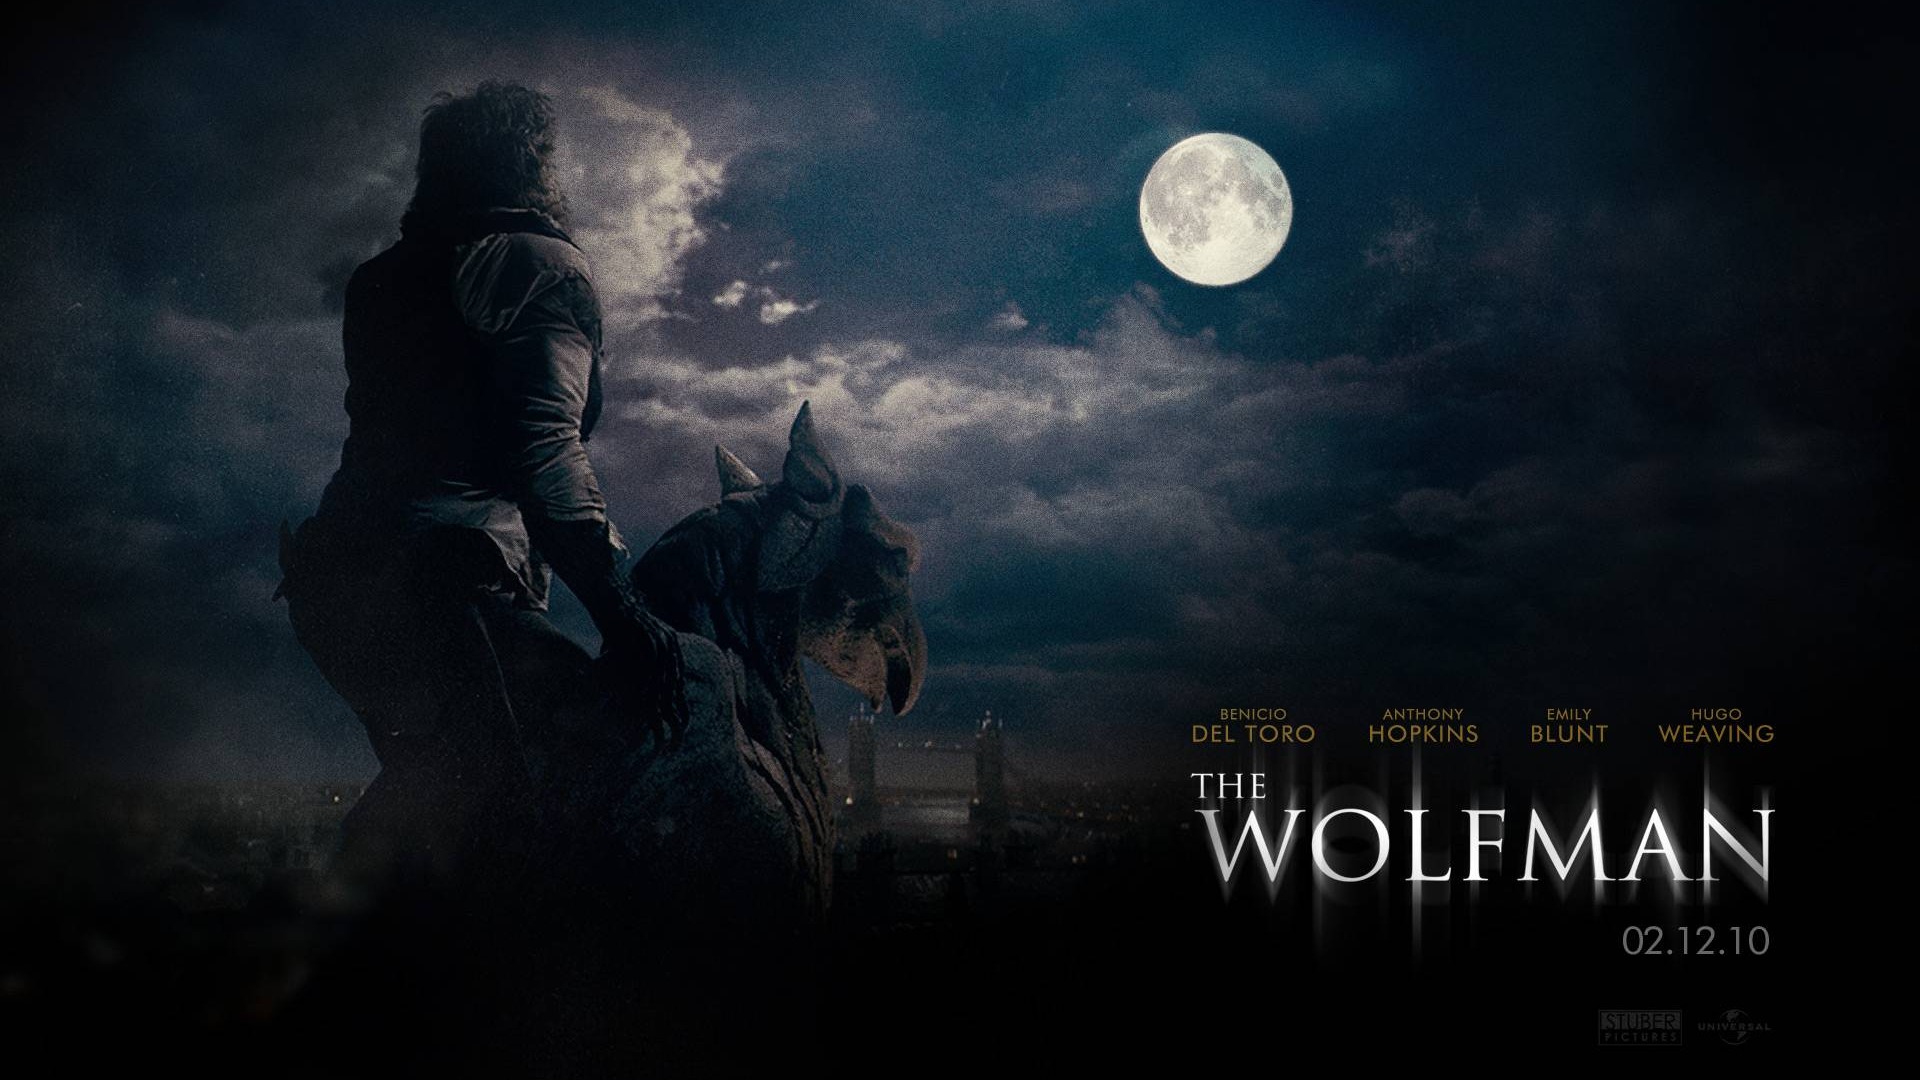 The Wolfman Movie Wallpapers #4 - 1920x1080